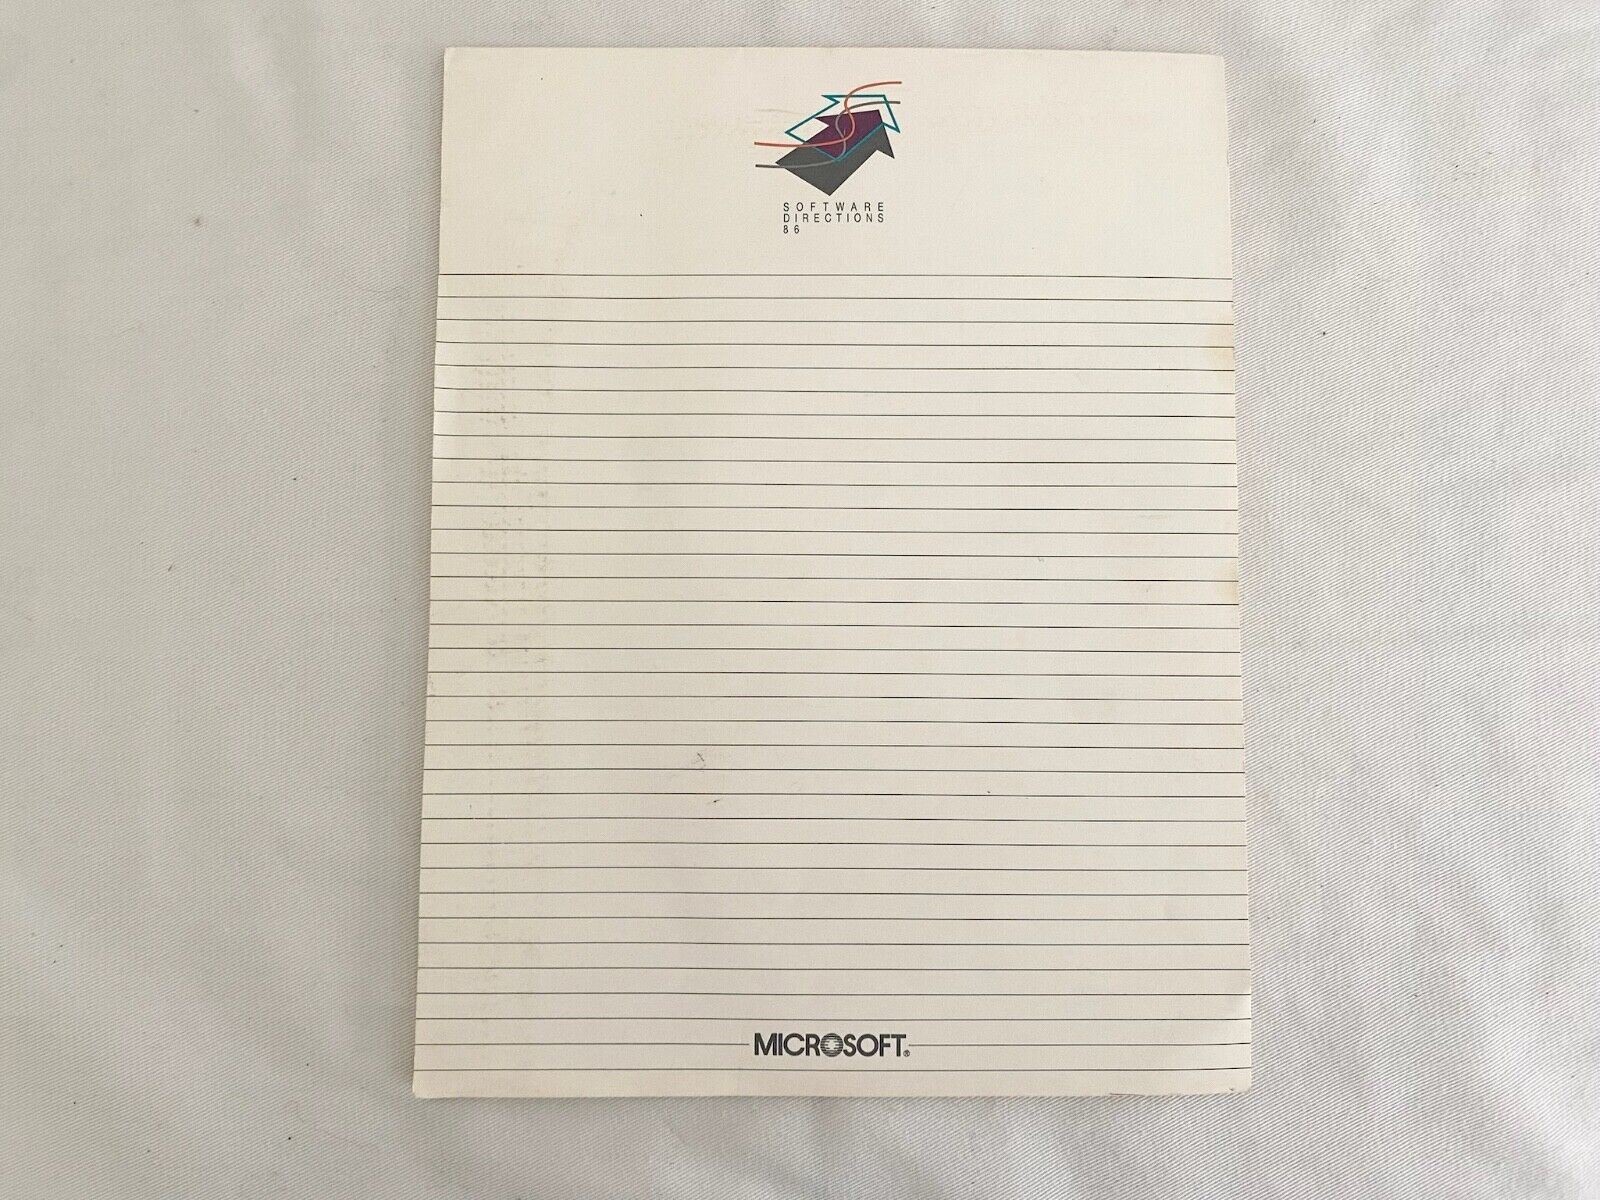 RARE Vintage 1986 Microsoft Software Directions Notepad, Large Paper Notebook